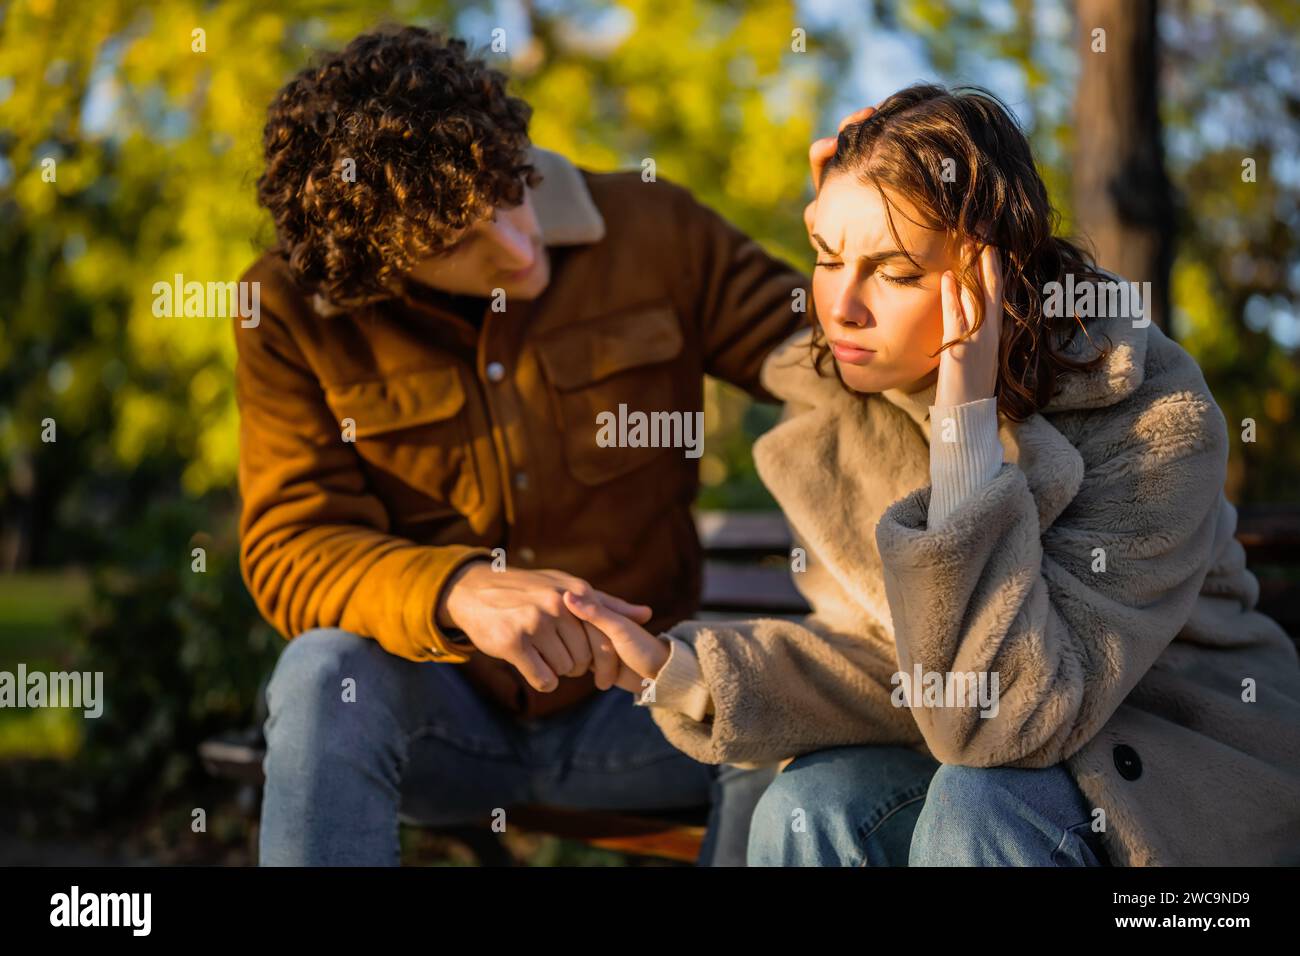 Young couple is sitting in park on sunny day. Woman is sad and man in consoling her. Stock Photo